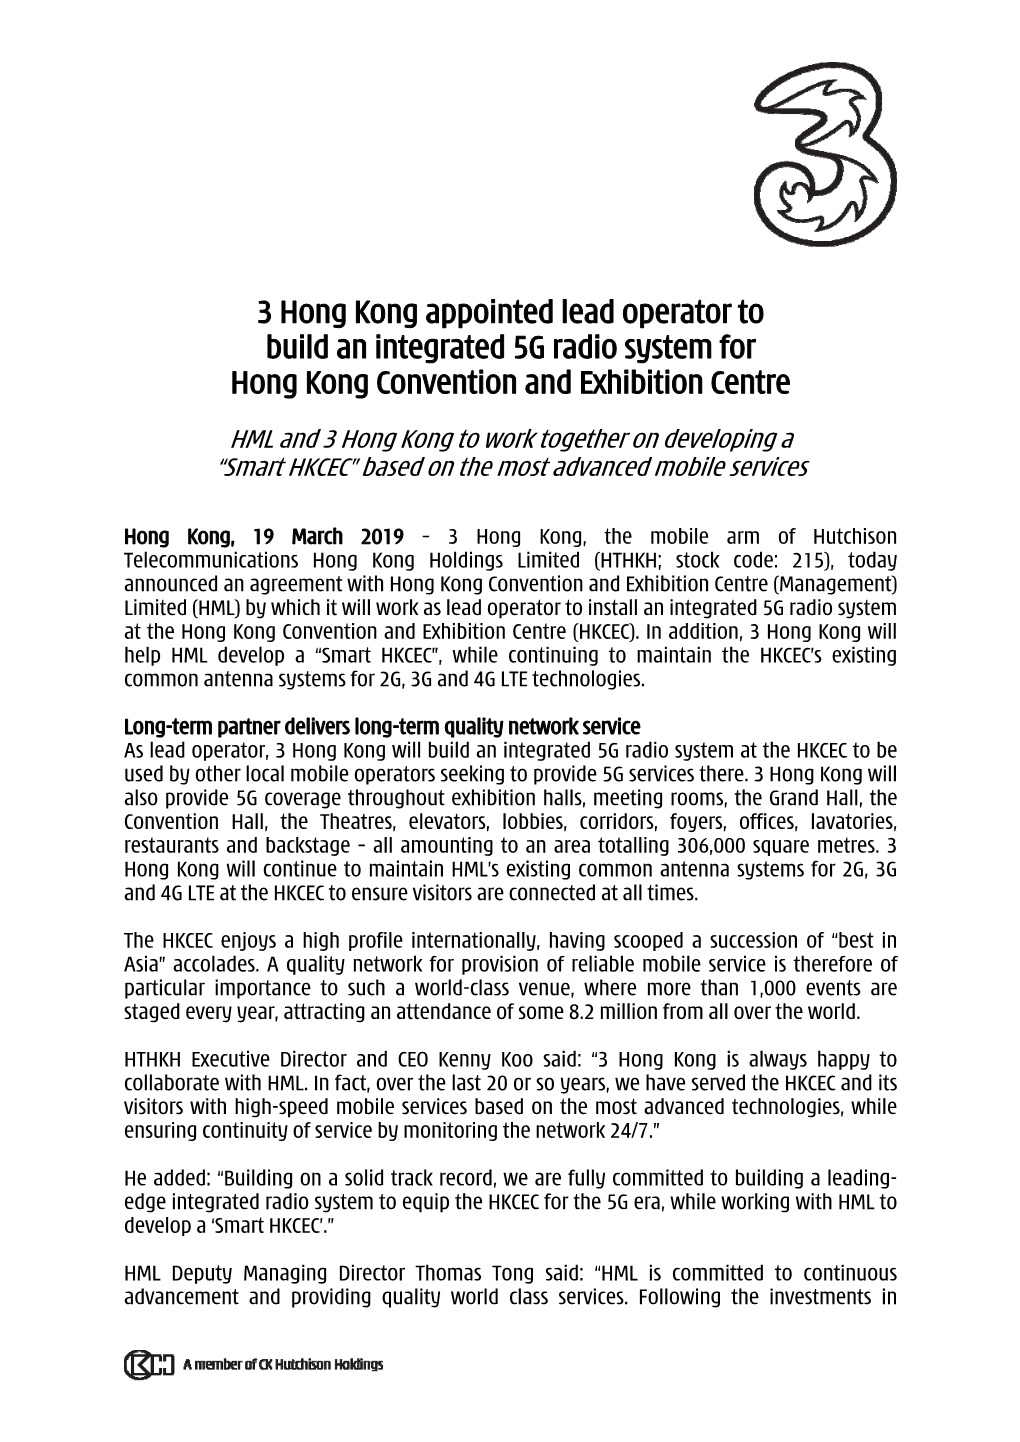 3 Hong Kong Appointed Lead Operator to Build an Integrated 5G Radio System for Hong Kong Convention and Exhibition Centre